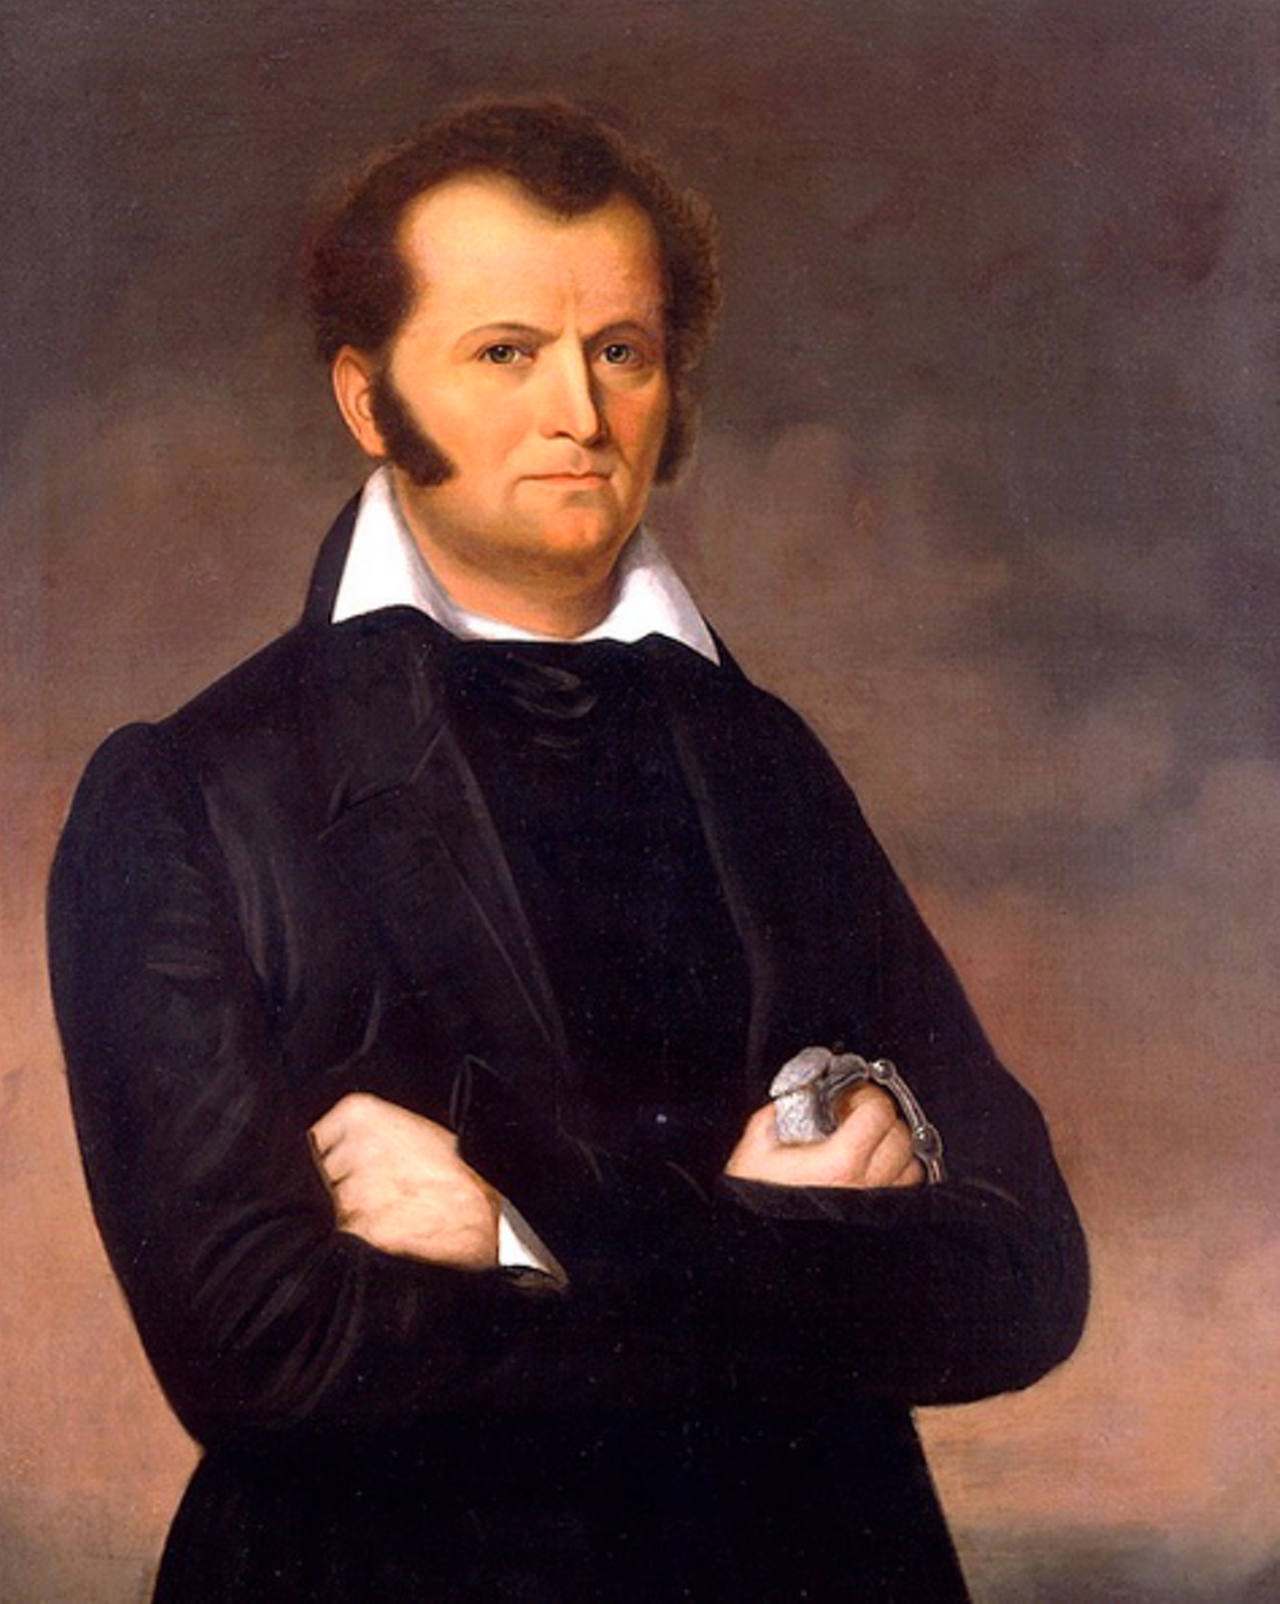 Jim Bowie
Though Jim Bowie’s physical legacy continues today as the namesake of the Bowie knife, he did many other things in his lifetime that don’t live on as history so much as legend, such as being shot and stabbed and still winning the Sandbar Fight after he stabbed the sheriff of Rapides Parish after a long-running feud. He died as an Alamo Defender, though he was bedridden at the time of the battle with what is now believed to be typhoid or tuberculosis. He’s buried at San Fernando Cathedral in case you care to pay your respects.
Photo via Instagram / drinkinbros_historybuffs_